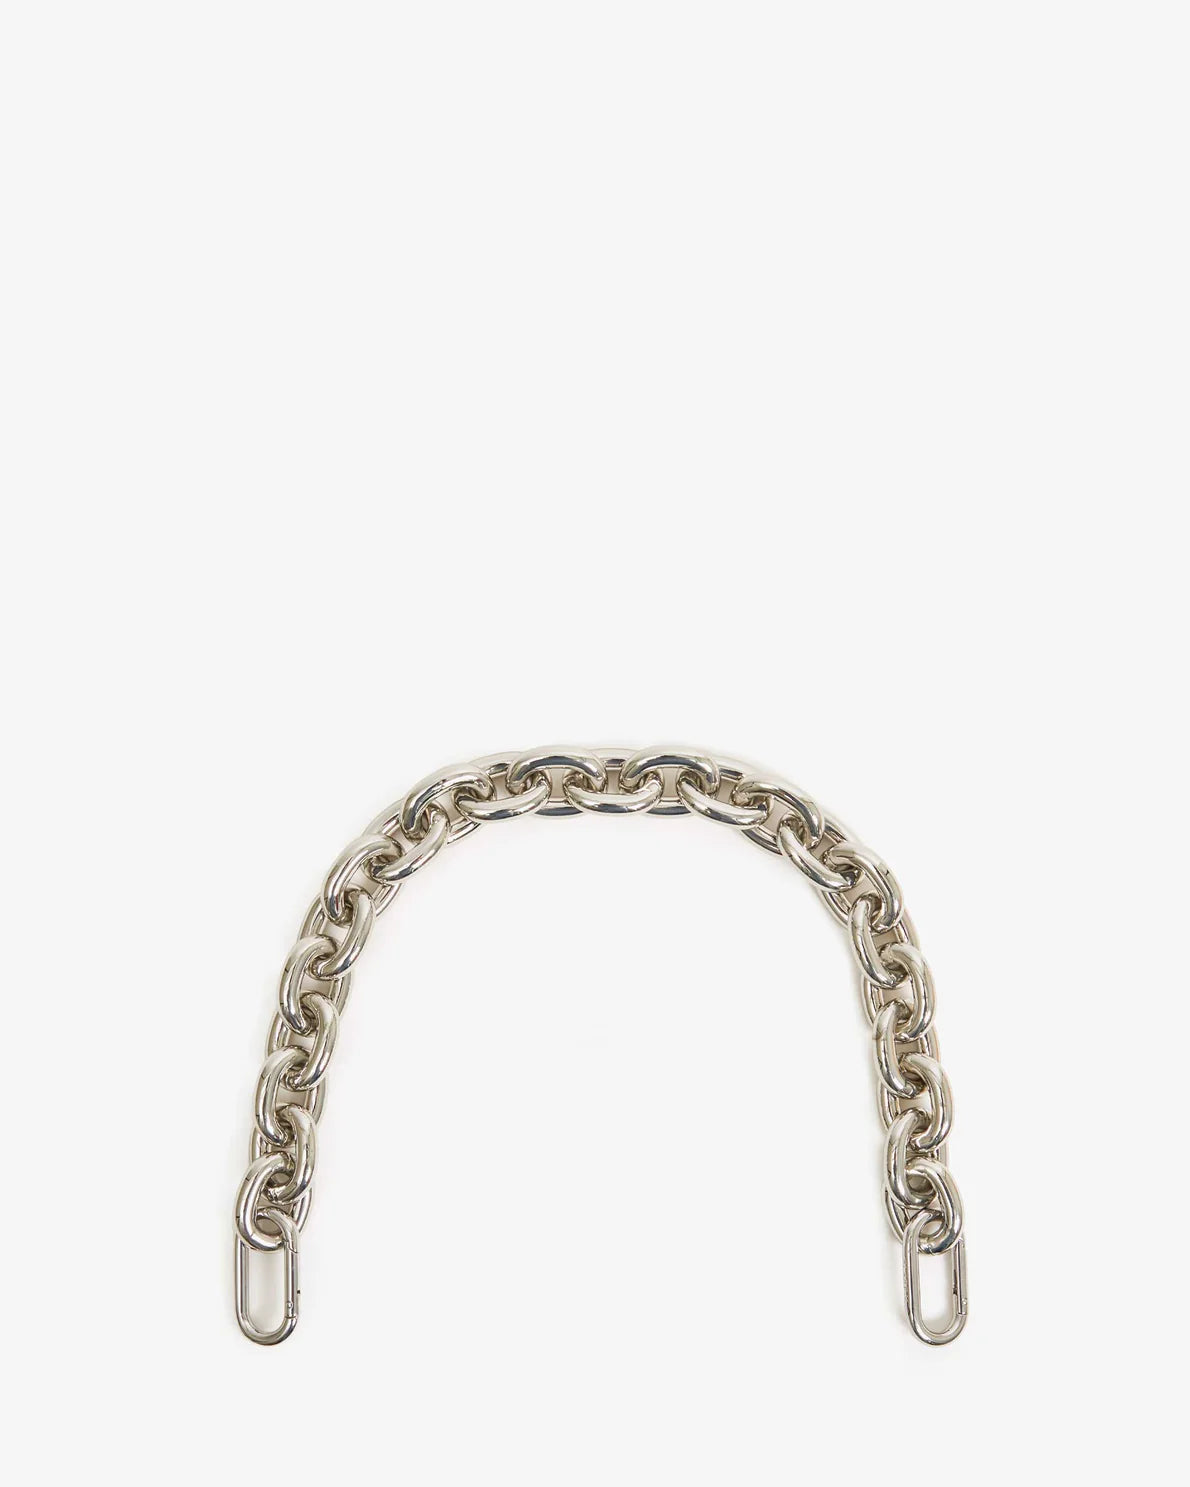 A Clare Vivier Shortie Strap with large, oval-shaped links, 17" long, arranged in a semi-circle against a plain white background. Both ends of the chain are equipped with larger brass spring links for attachment.